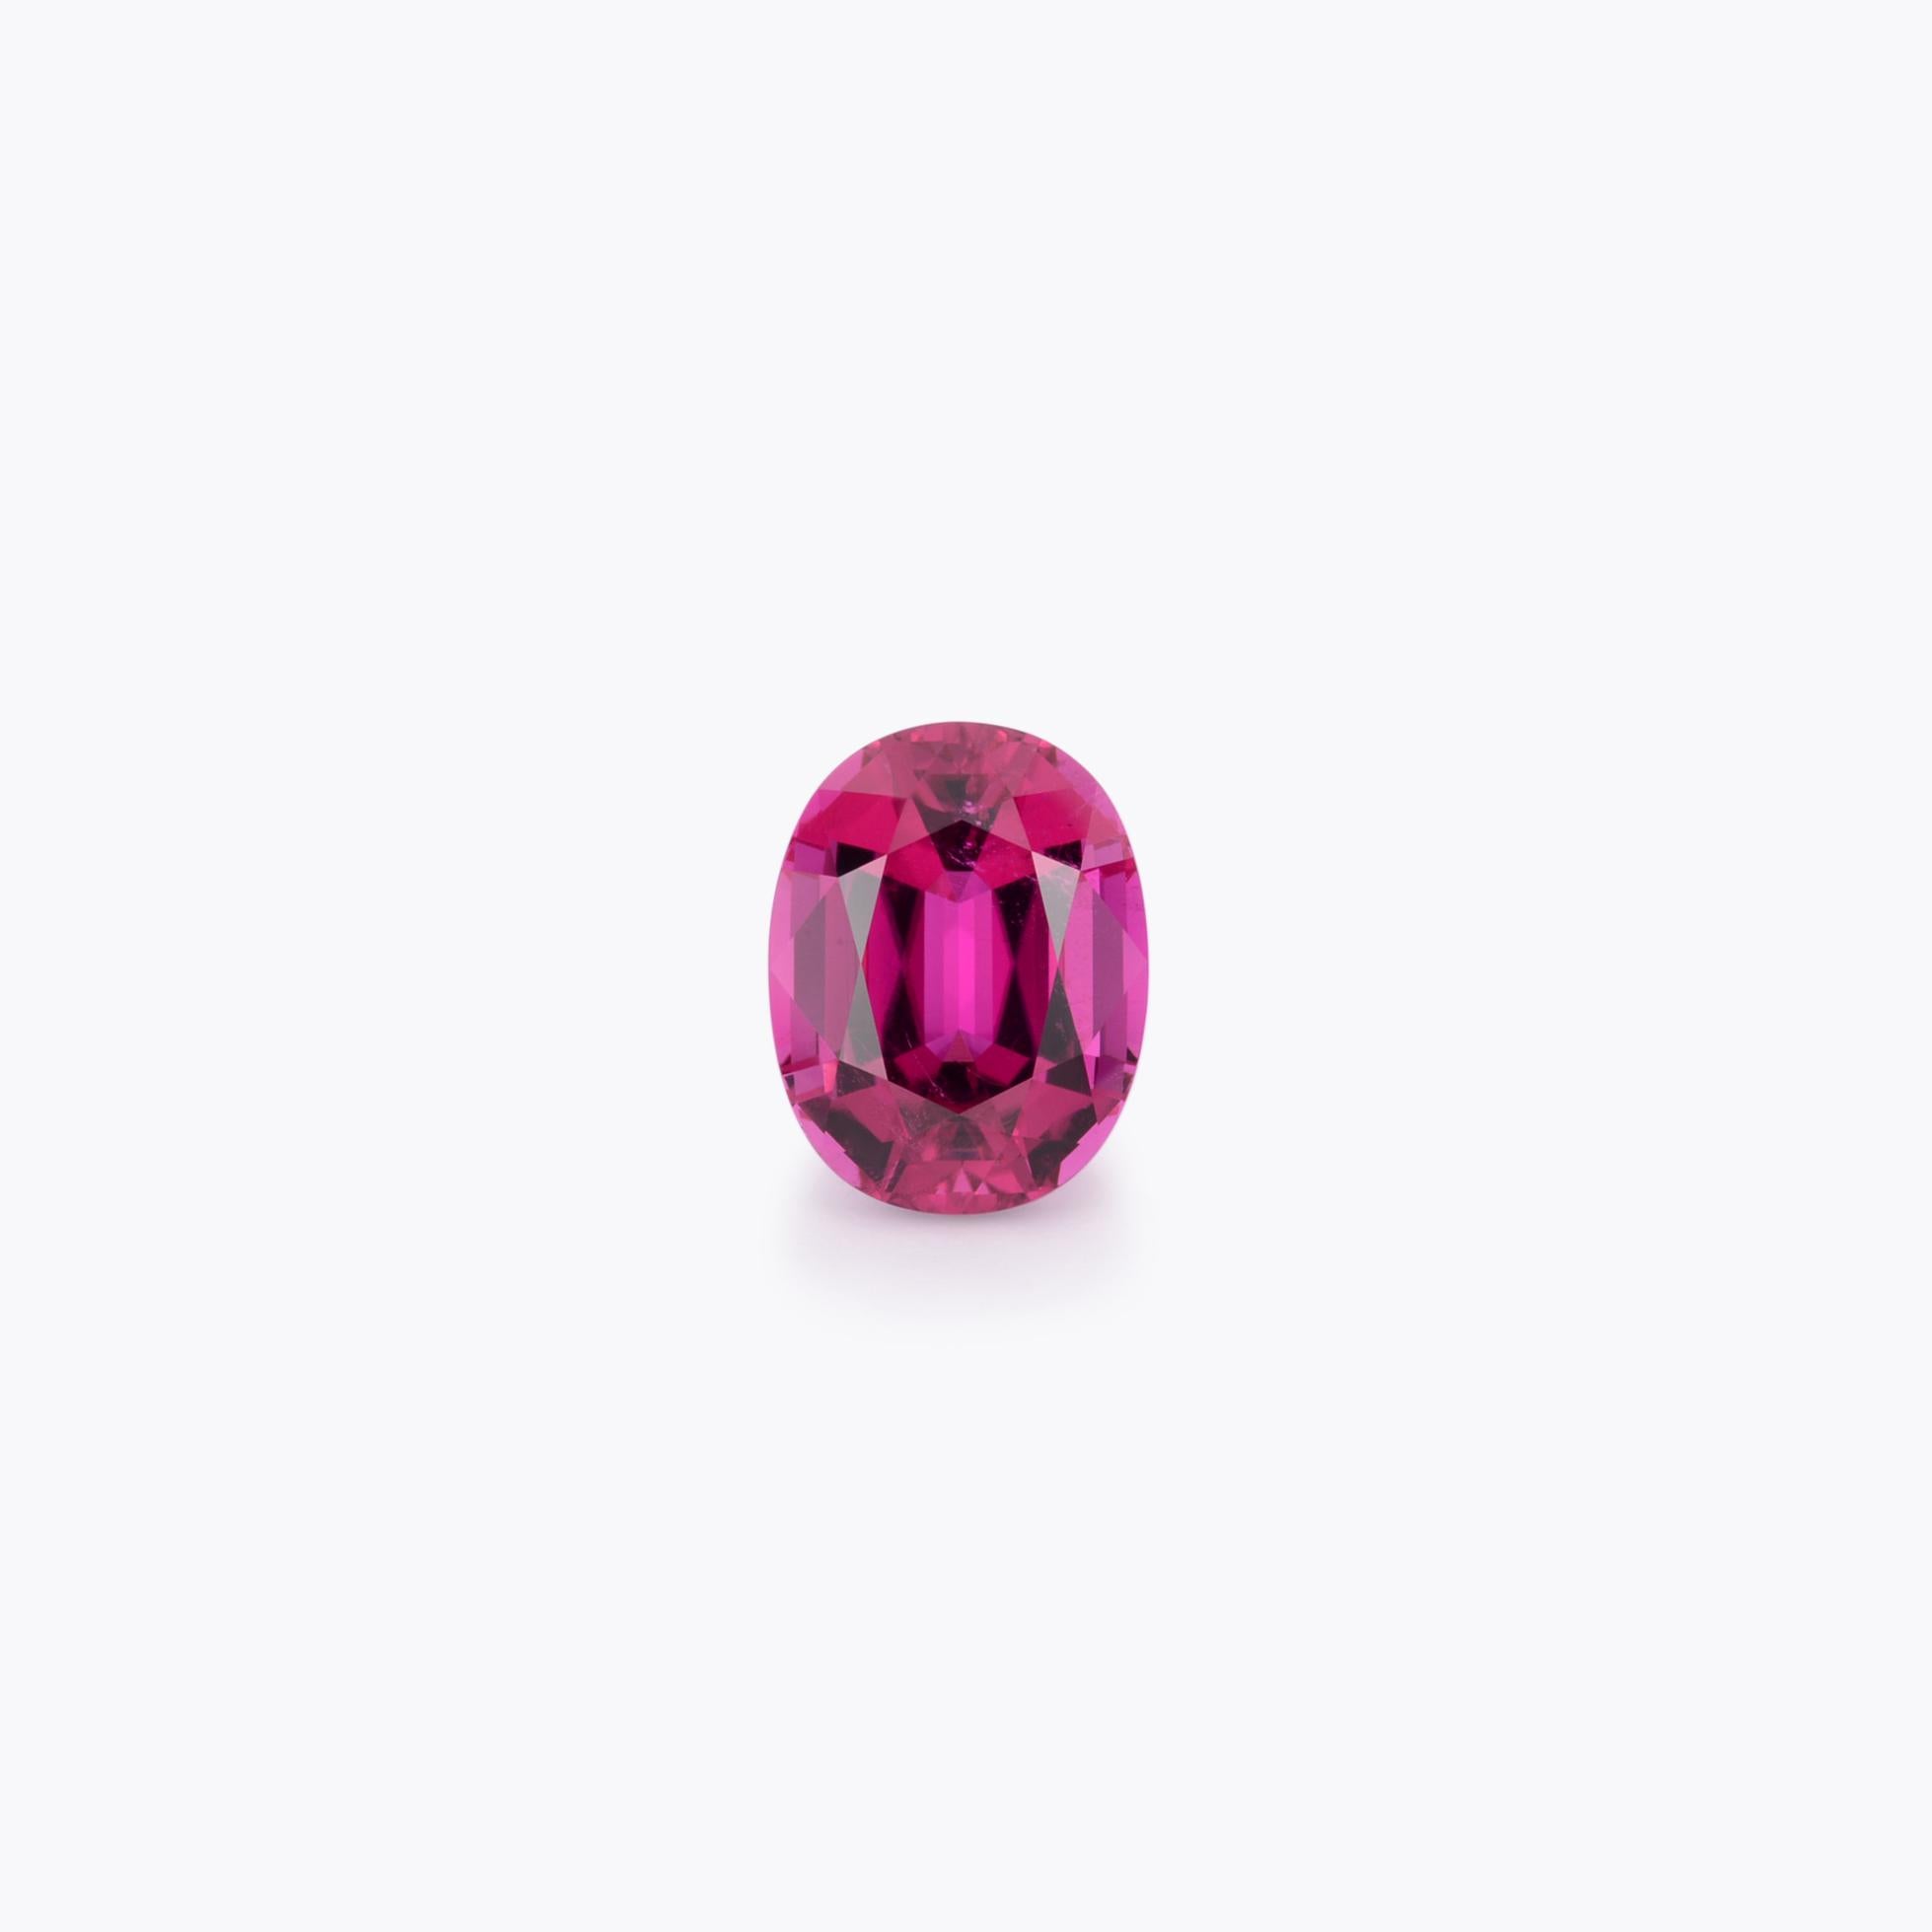 Notable 10.49 carat Rubelite Tourmaline oval gem offered loose to a world-class gemstone lover.
Returns are accepted and paid by us within 7 days of delivery.
We offer supreme custom jewelry work upon request. Please contact us for more details.
For